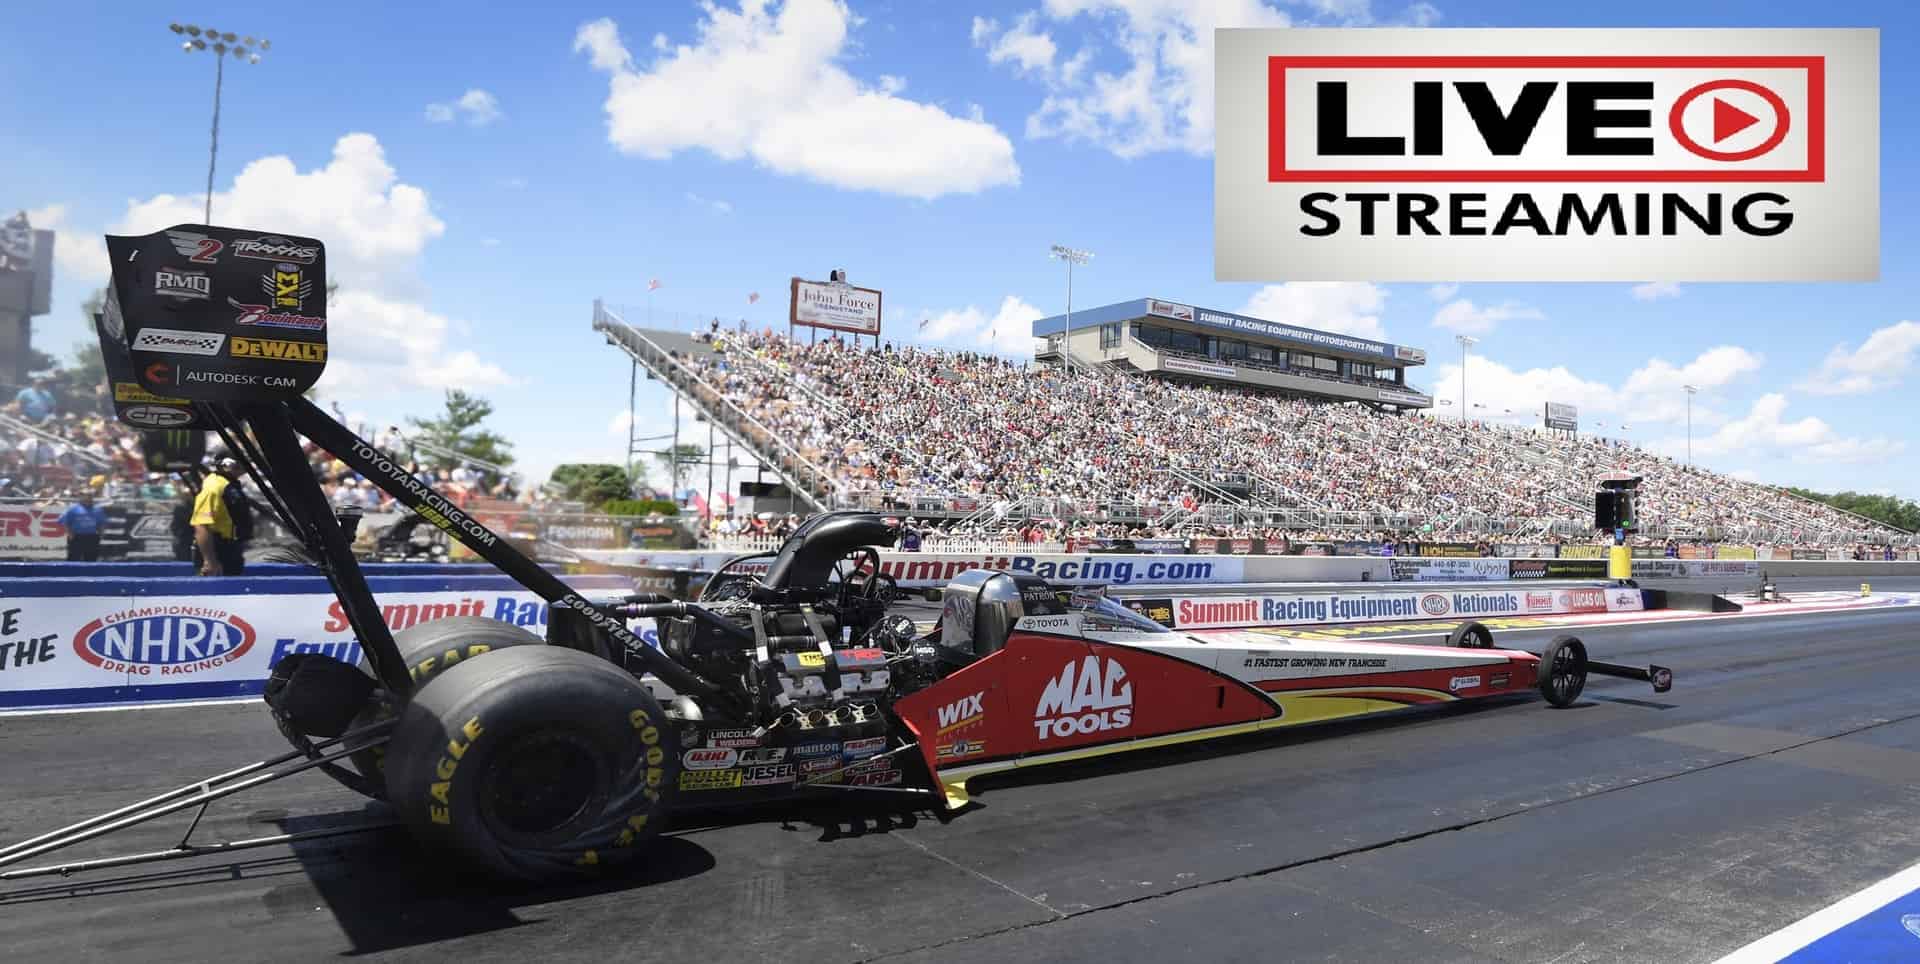 live-2015-nhra-4-wide-nationals-streaming